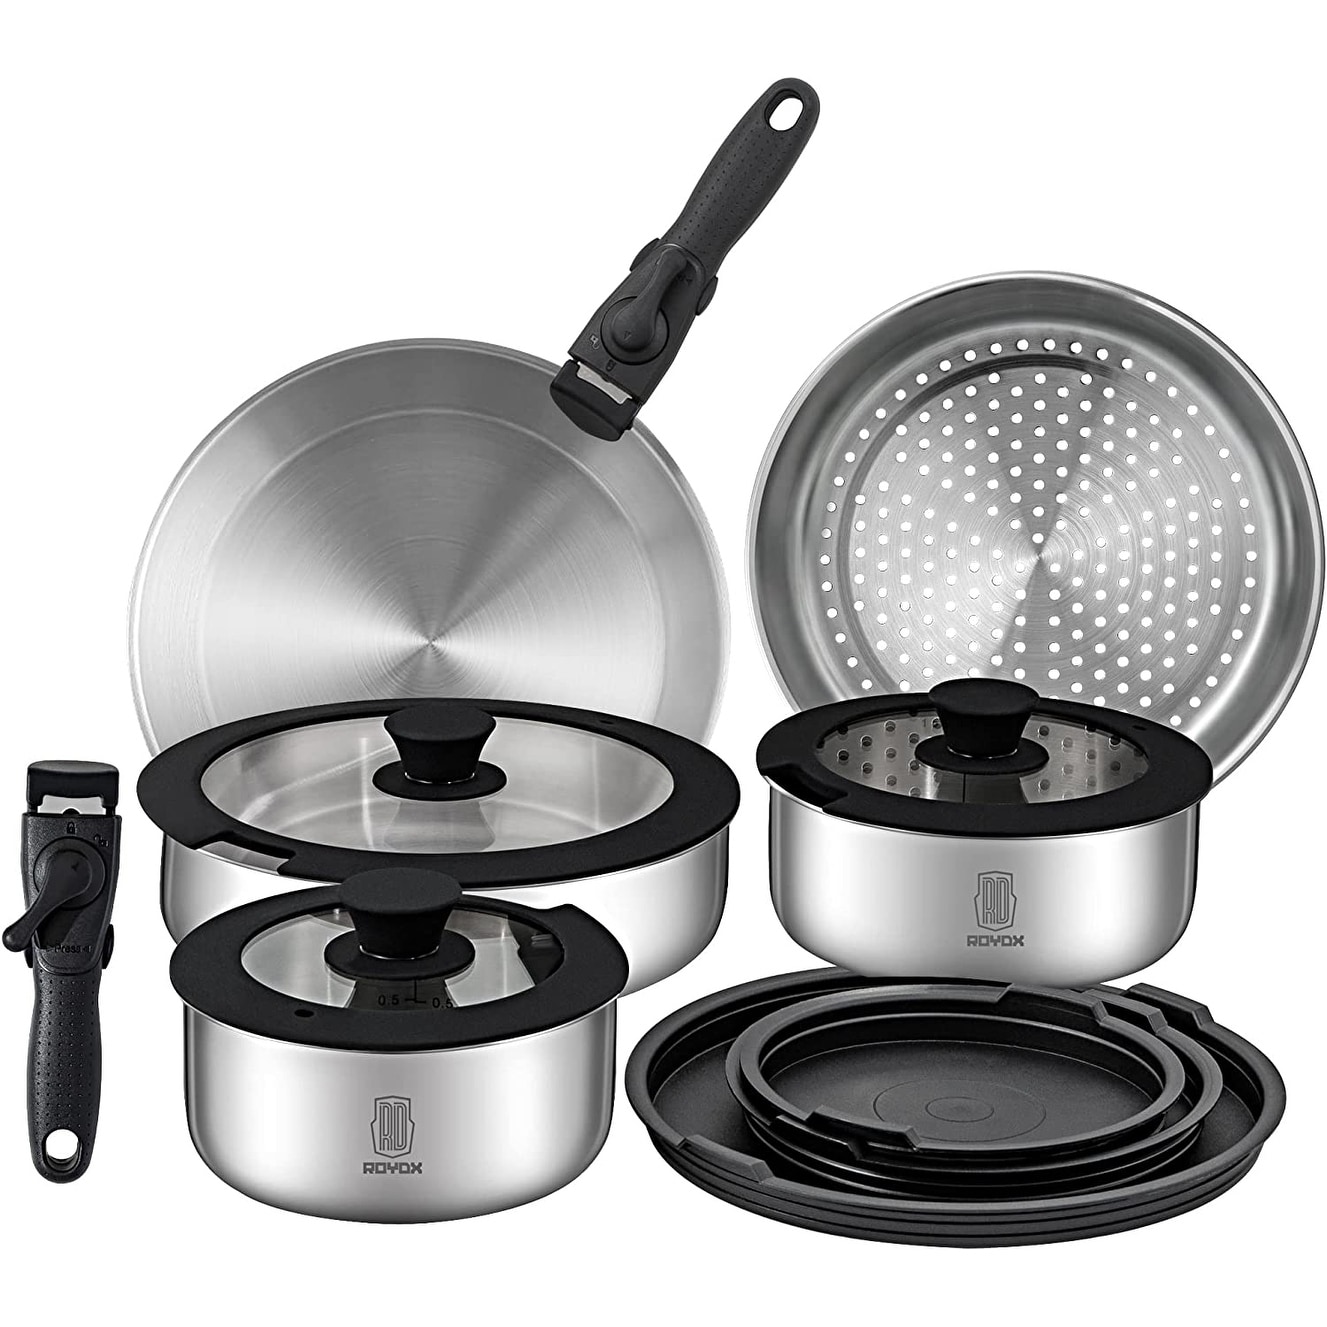 https://ak1.ostkcdn.com/images/products/is/images/direct/739f2a7ddd45a0601a0992ad139f68f16a51c89f/16-Piece-Stainless-Steel-Cookware-Set%2C-Kitchen-Removable-Handle-Stackable-Pots-and-Pans-Set%2C-Frying-Pans-Saucepans-with-Lid.jpg